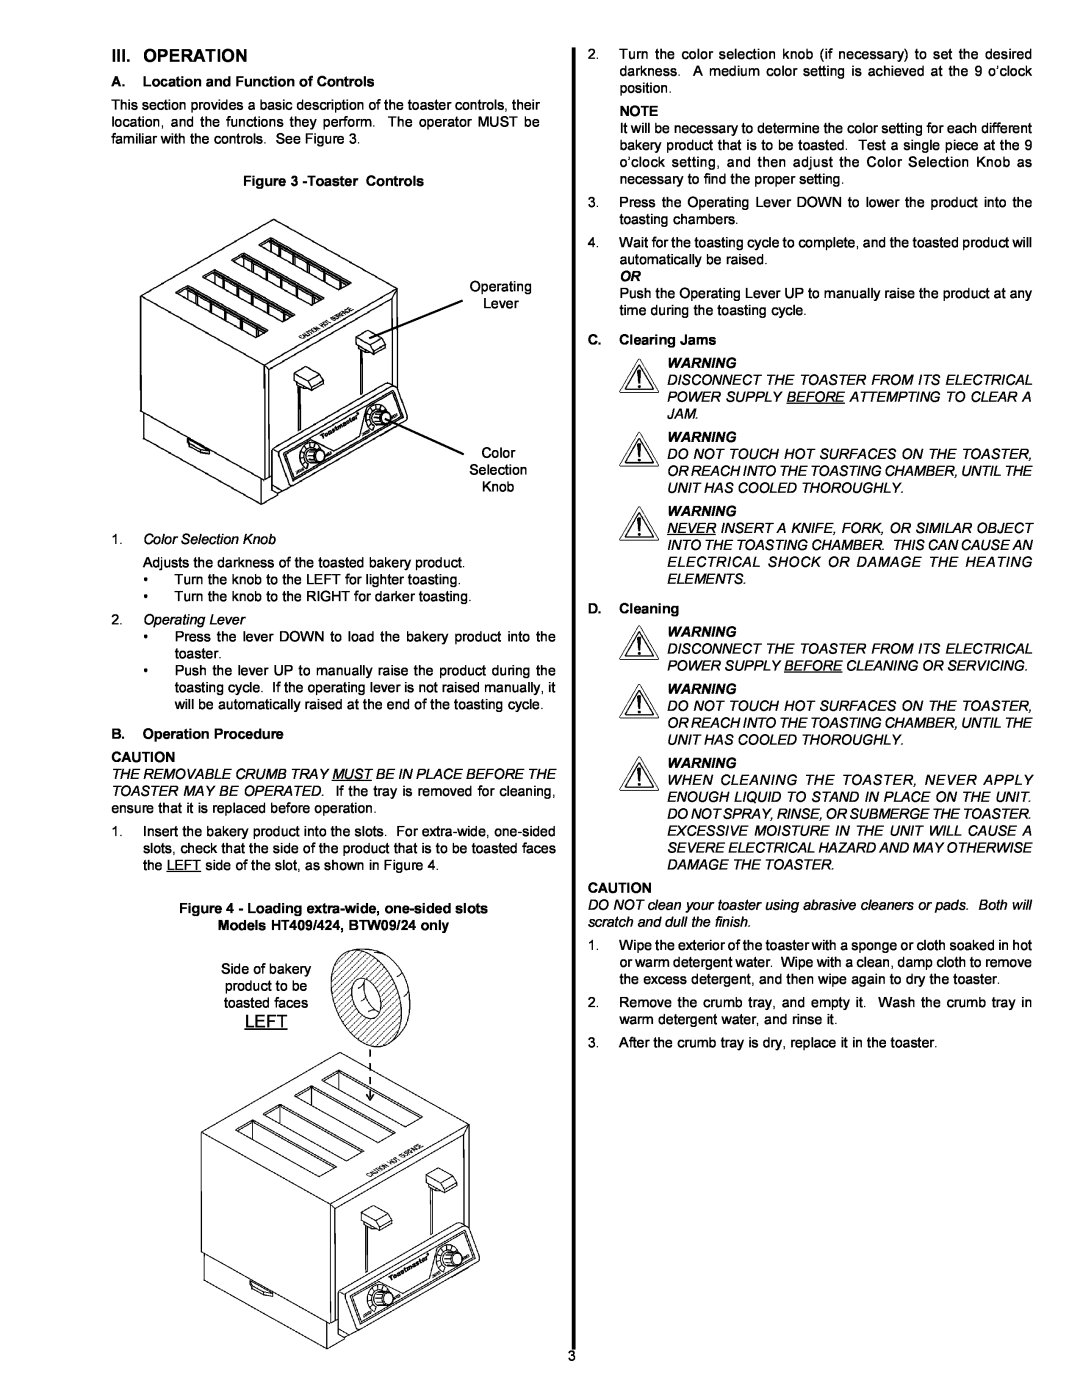 Toastmaster TP224 Iii. Operation, A.Location and Function of Controls, ToasterControls, B.Operation Procedure, D.Cleaning 